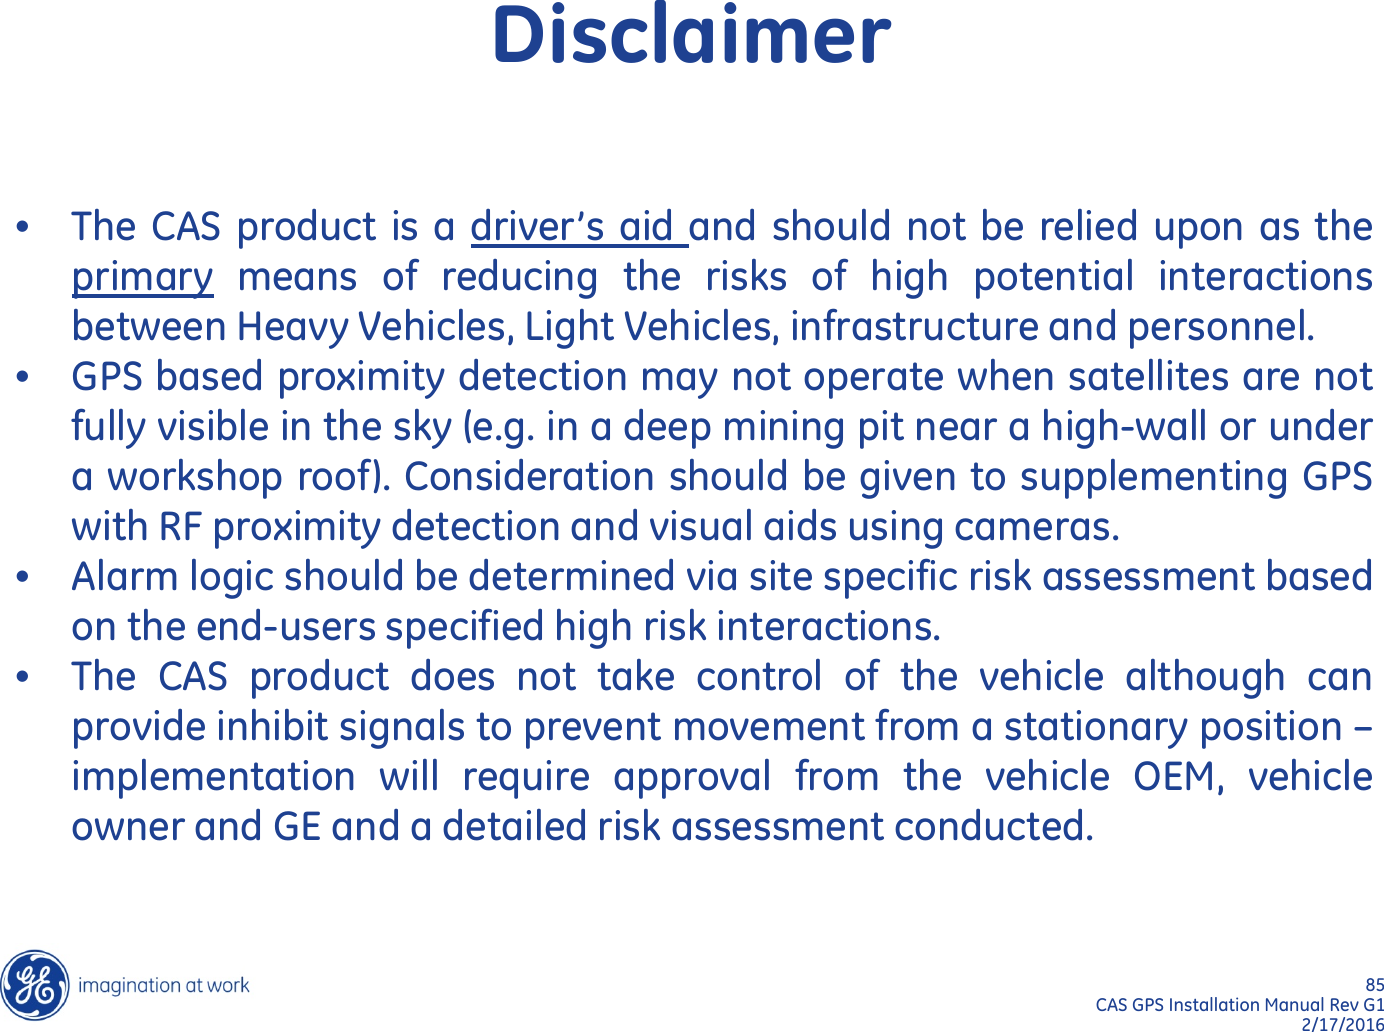 85  CAS GPS Installation Manual Rev G1 2/17/2016 •The CAS product is a  driver’s aid and should not be relied upon as the primary means of reducing the  risks  of high potential interactions between Heavy Vehicles, Light Vehicles, infrastructure and personnel. •GPS based proximity detection may not operate when satellites are not fully visible in the sky (e.g. in a deep mining pit near a high-wall or under a workshop roof). Consideration should be given to supplementing GPS with RF proximity detection and visual aids using cameras. •Alarm logic should be determined via site specific risk assessment based on the end-users specified high risk interactions. •The CAS product does not take control of the vehicle although can provide inhibit signals to prevent movement from a stationary position – implementation will require approval from the vehicle OEM,  vehicle owner and GE and a detailed risk assessment conducted.  Disclaimer 